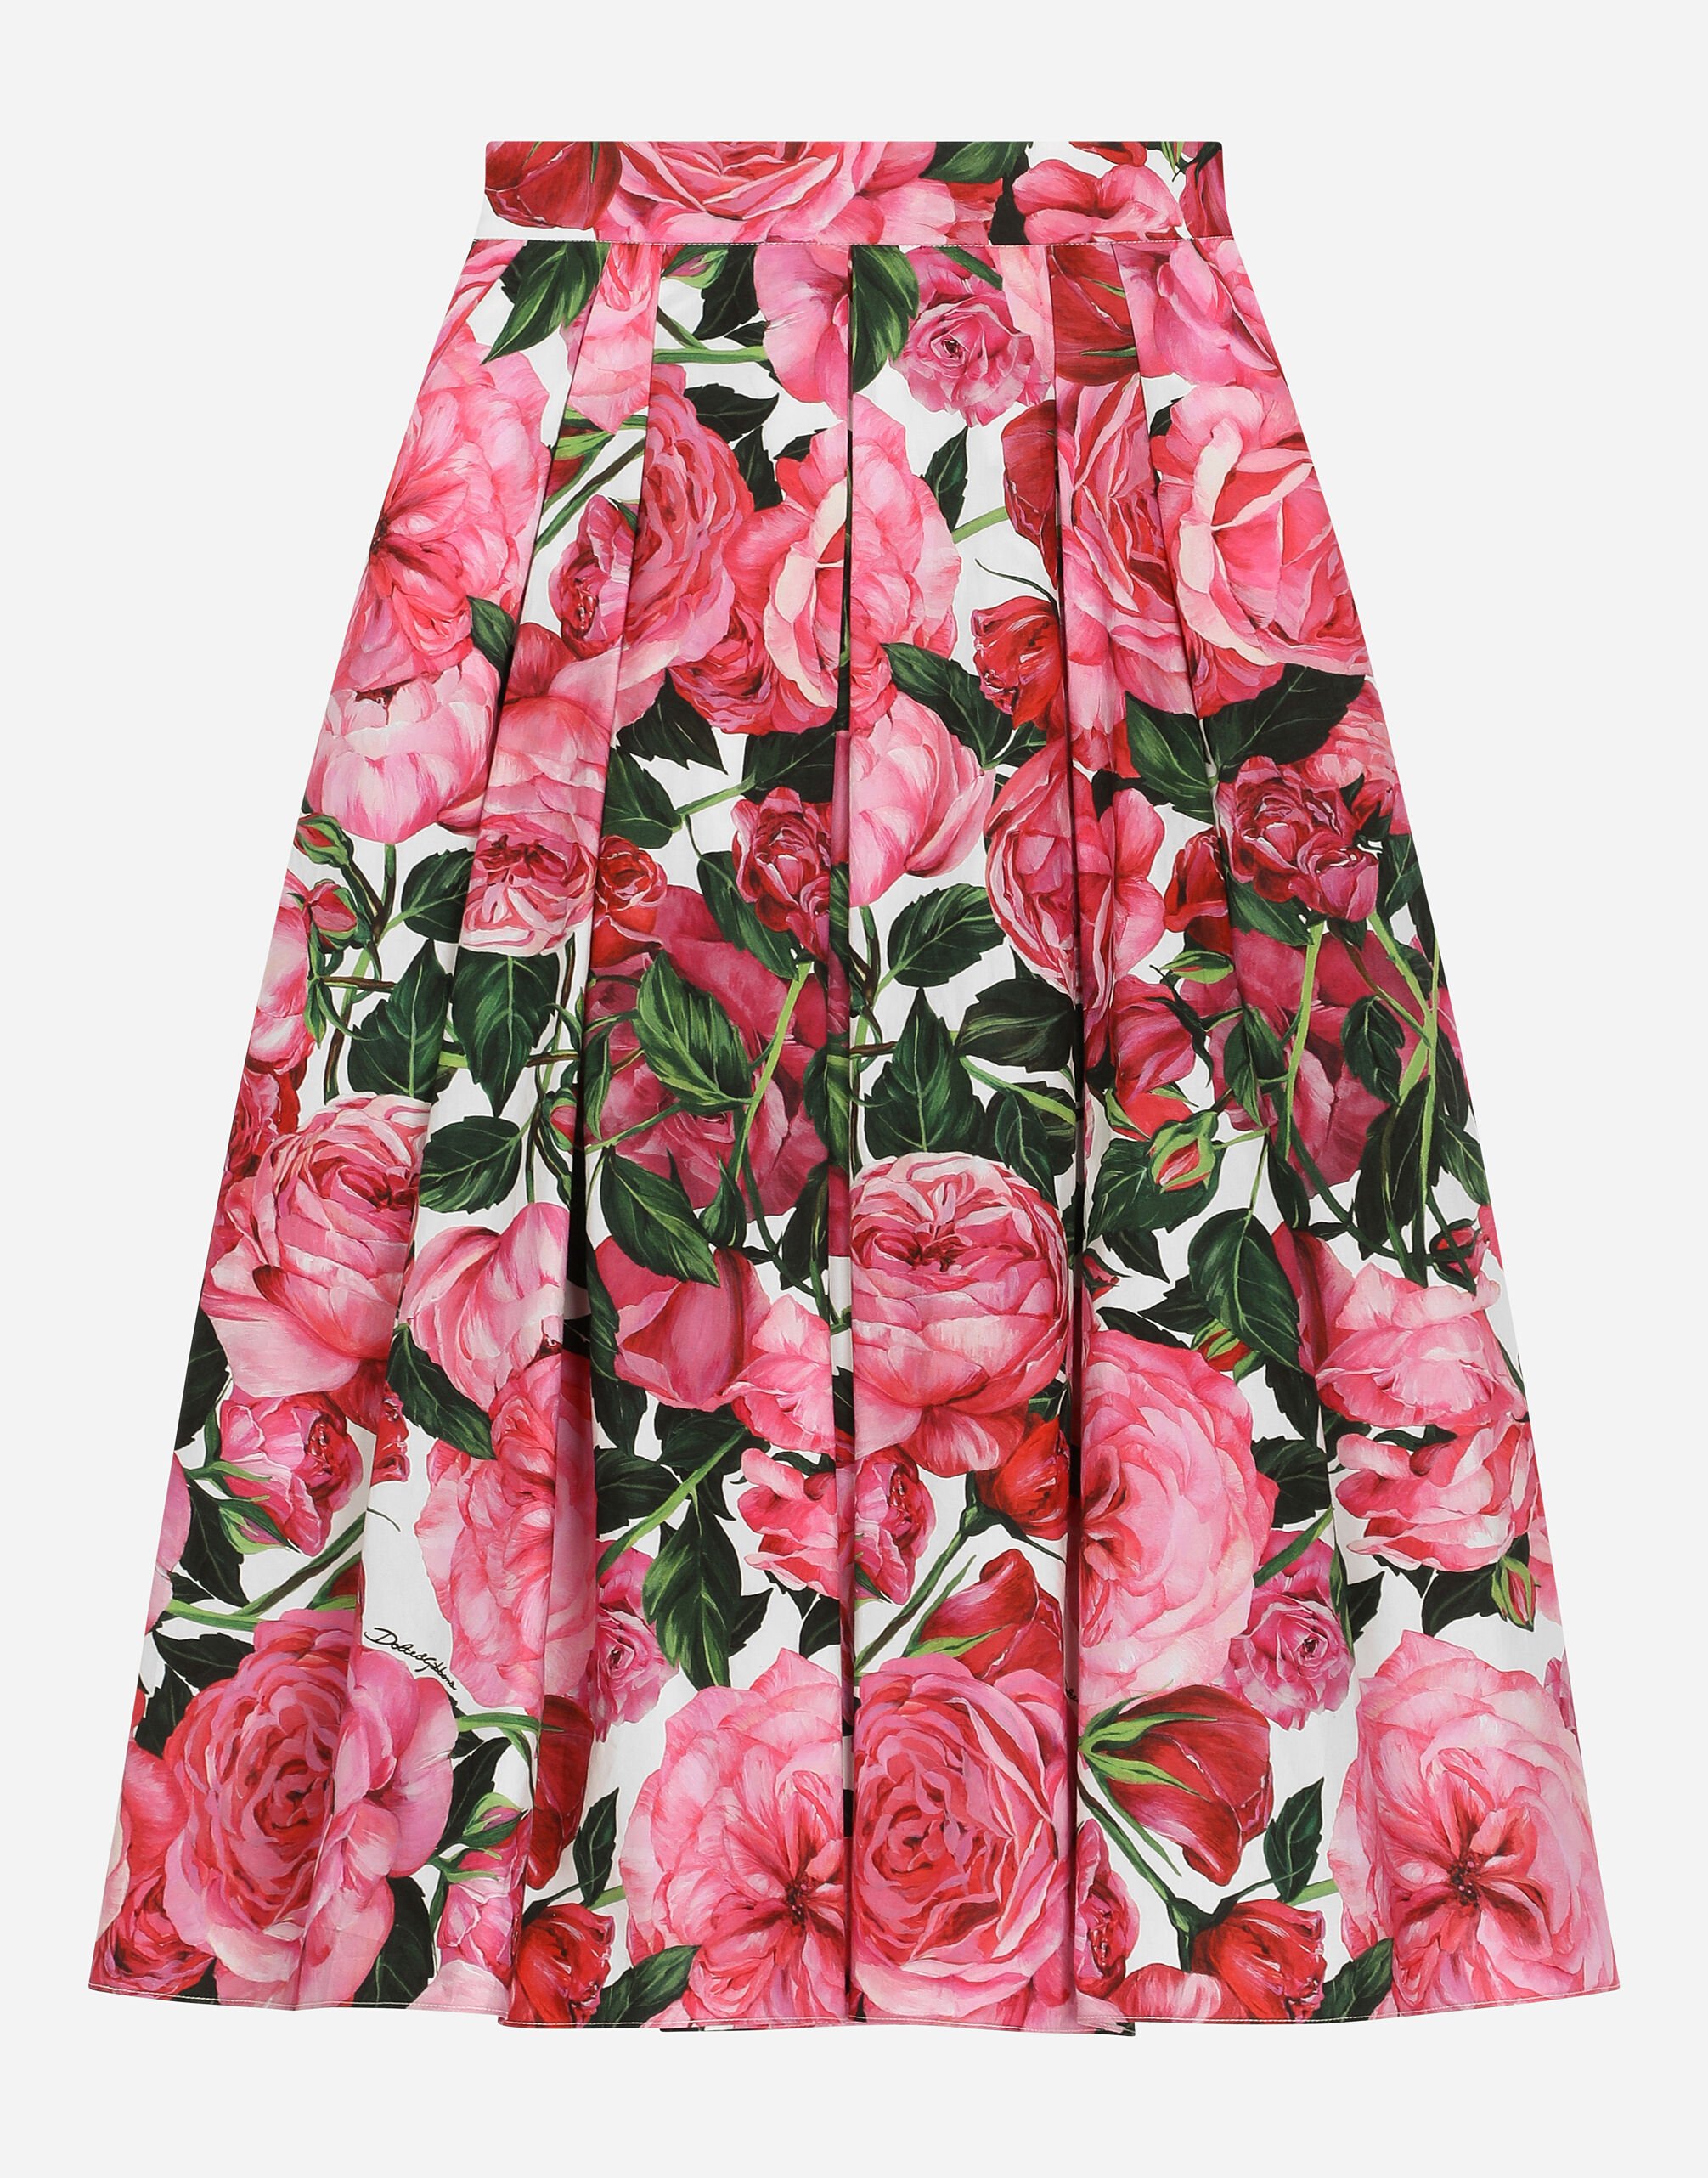 ${brand} Poplin dress with rose print over a white background ${colorDescription} ${masterID}